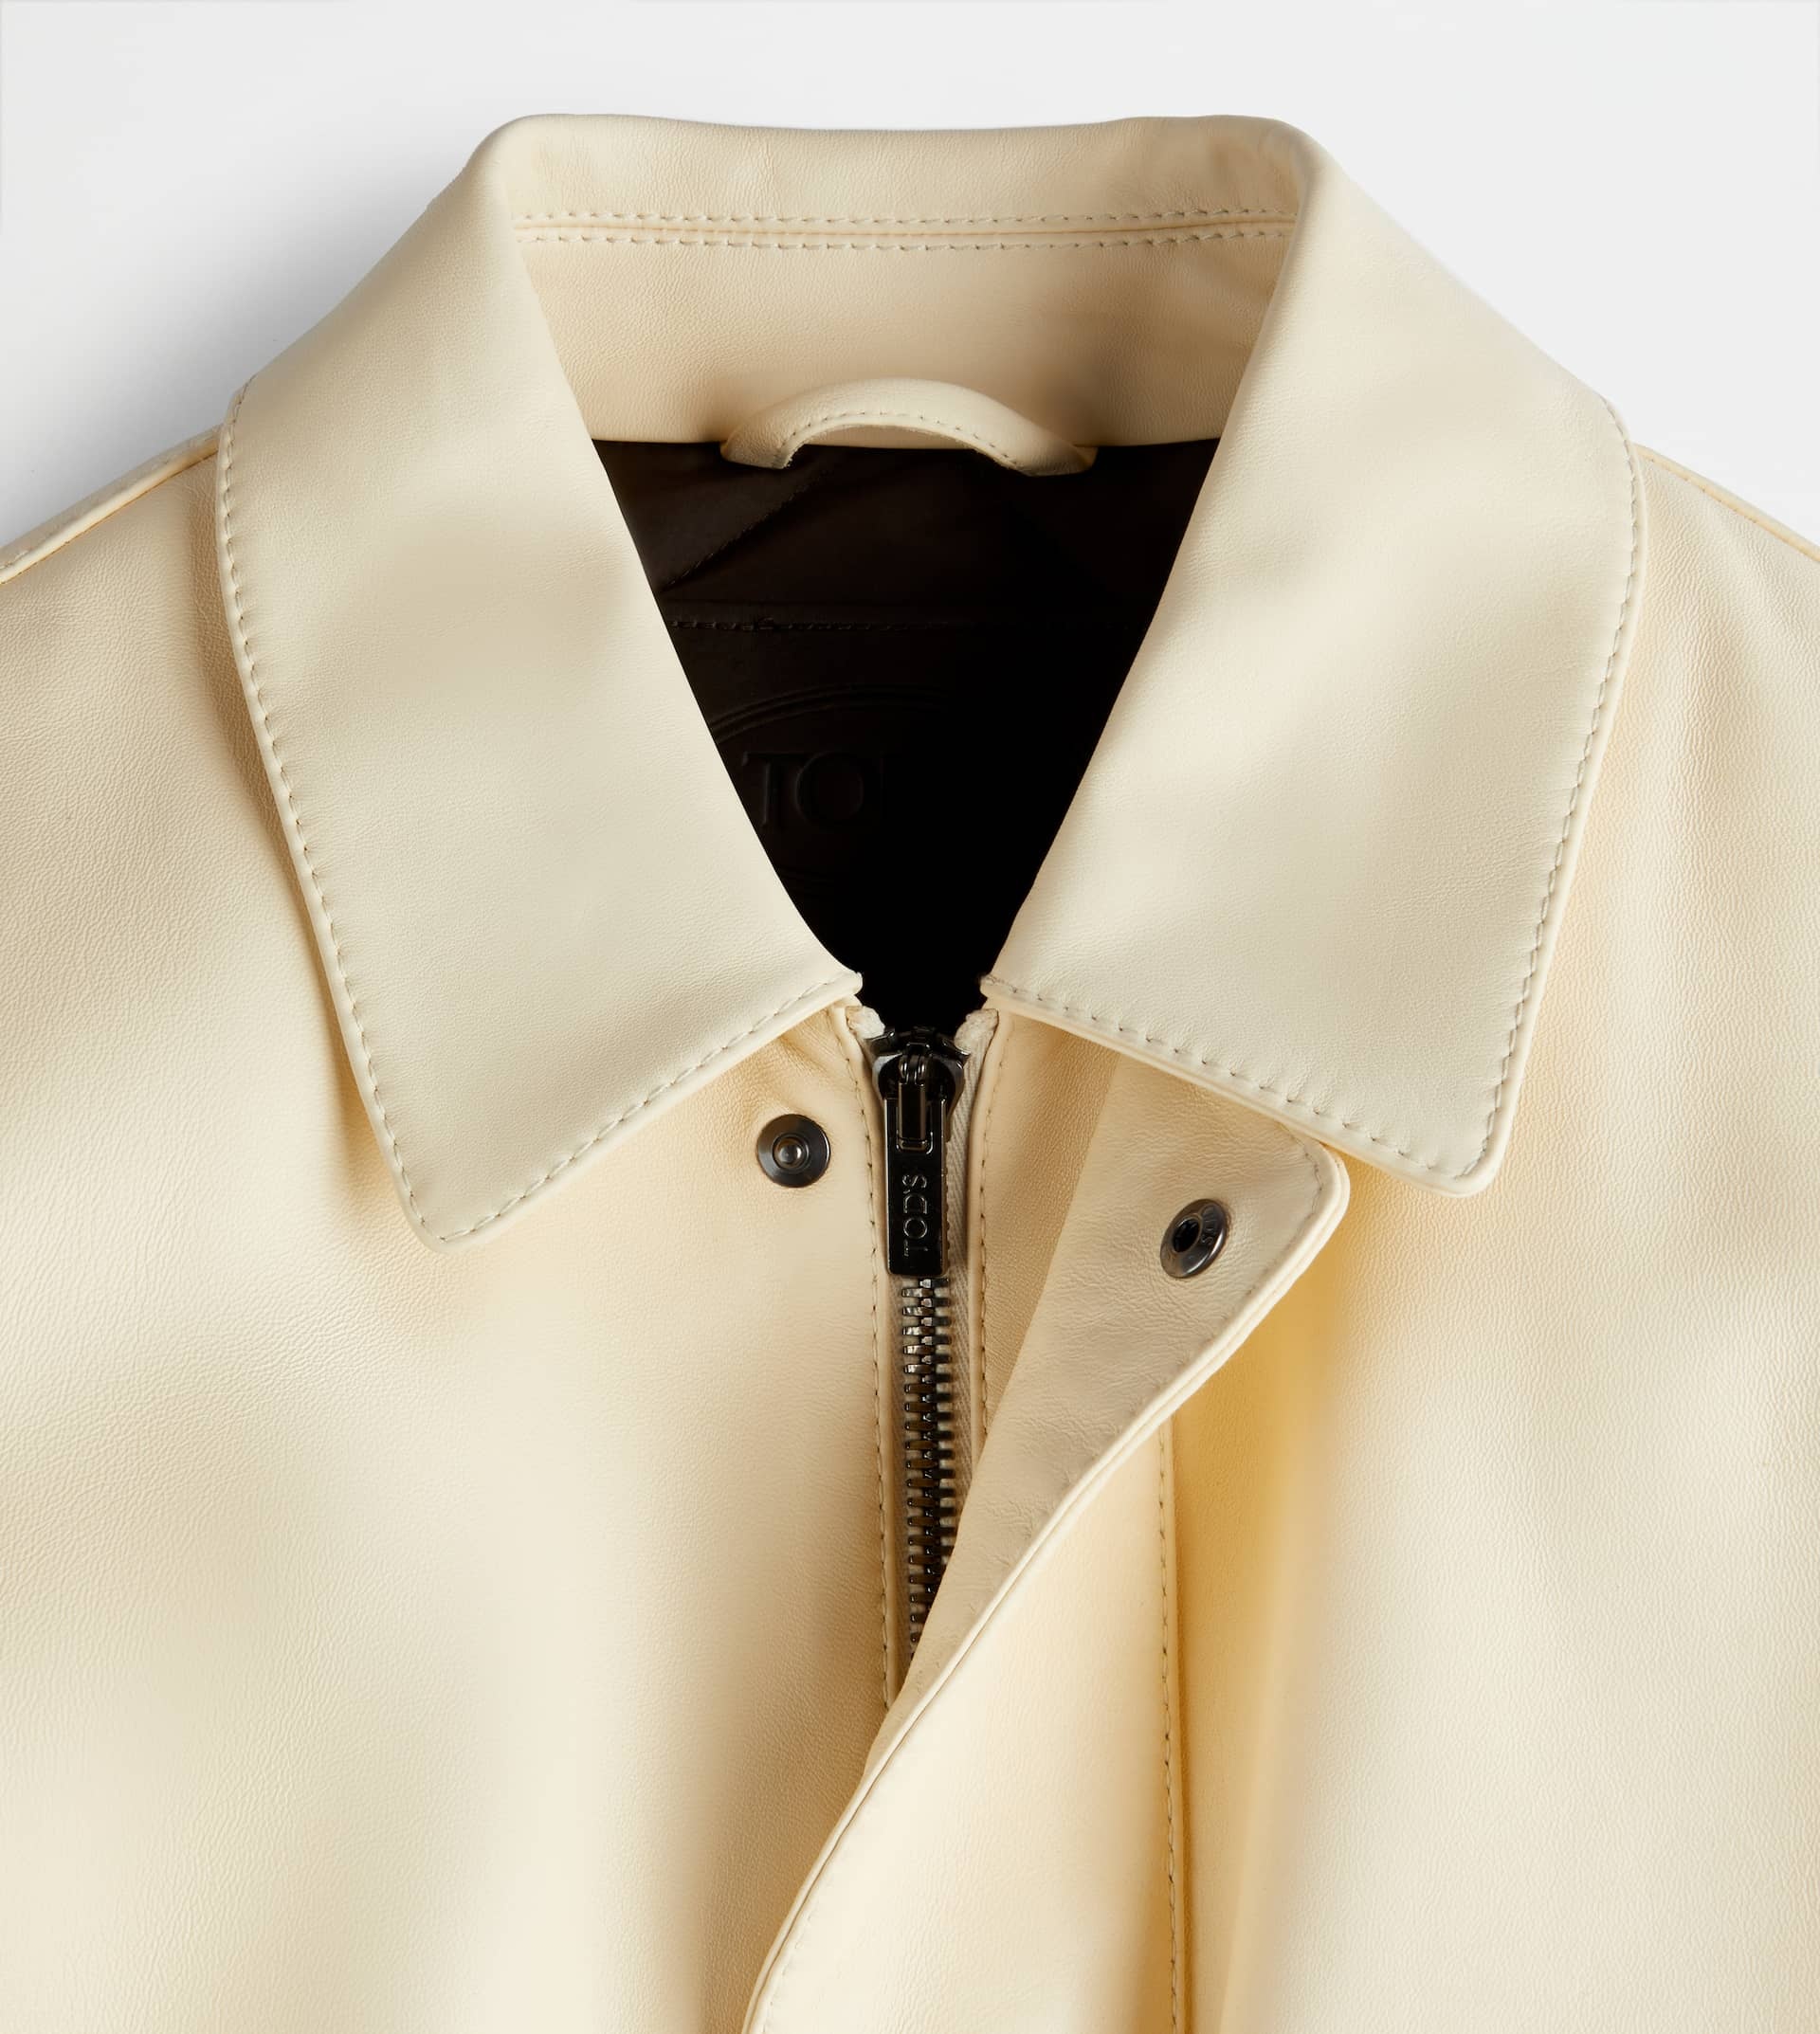 BOMBER JACKET IN NAPPA LEATHER - WHITE - 9